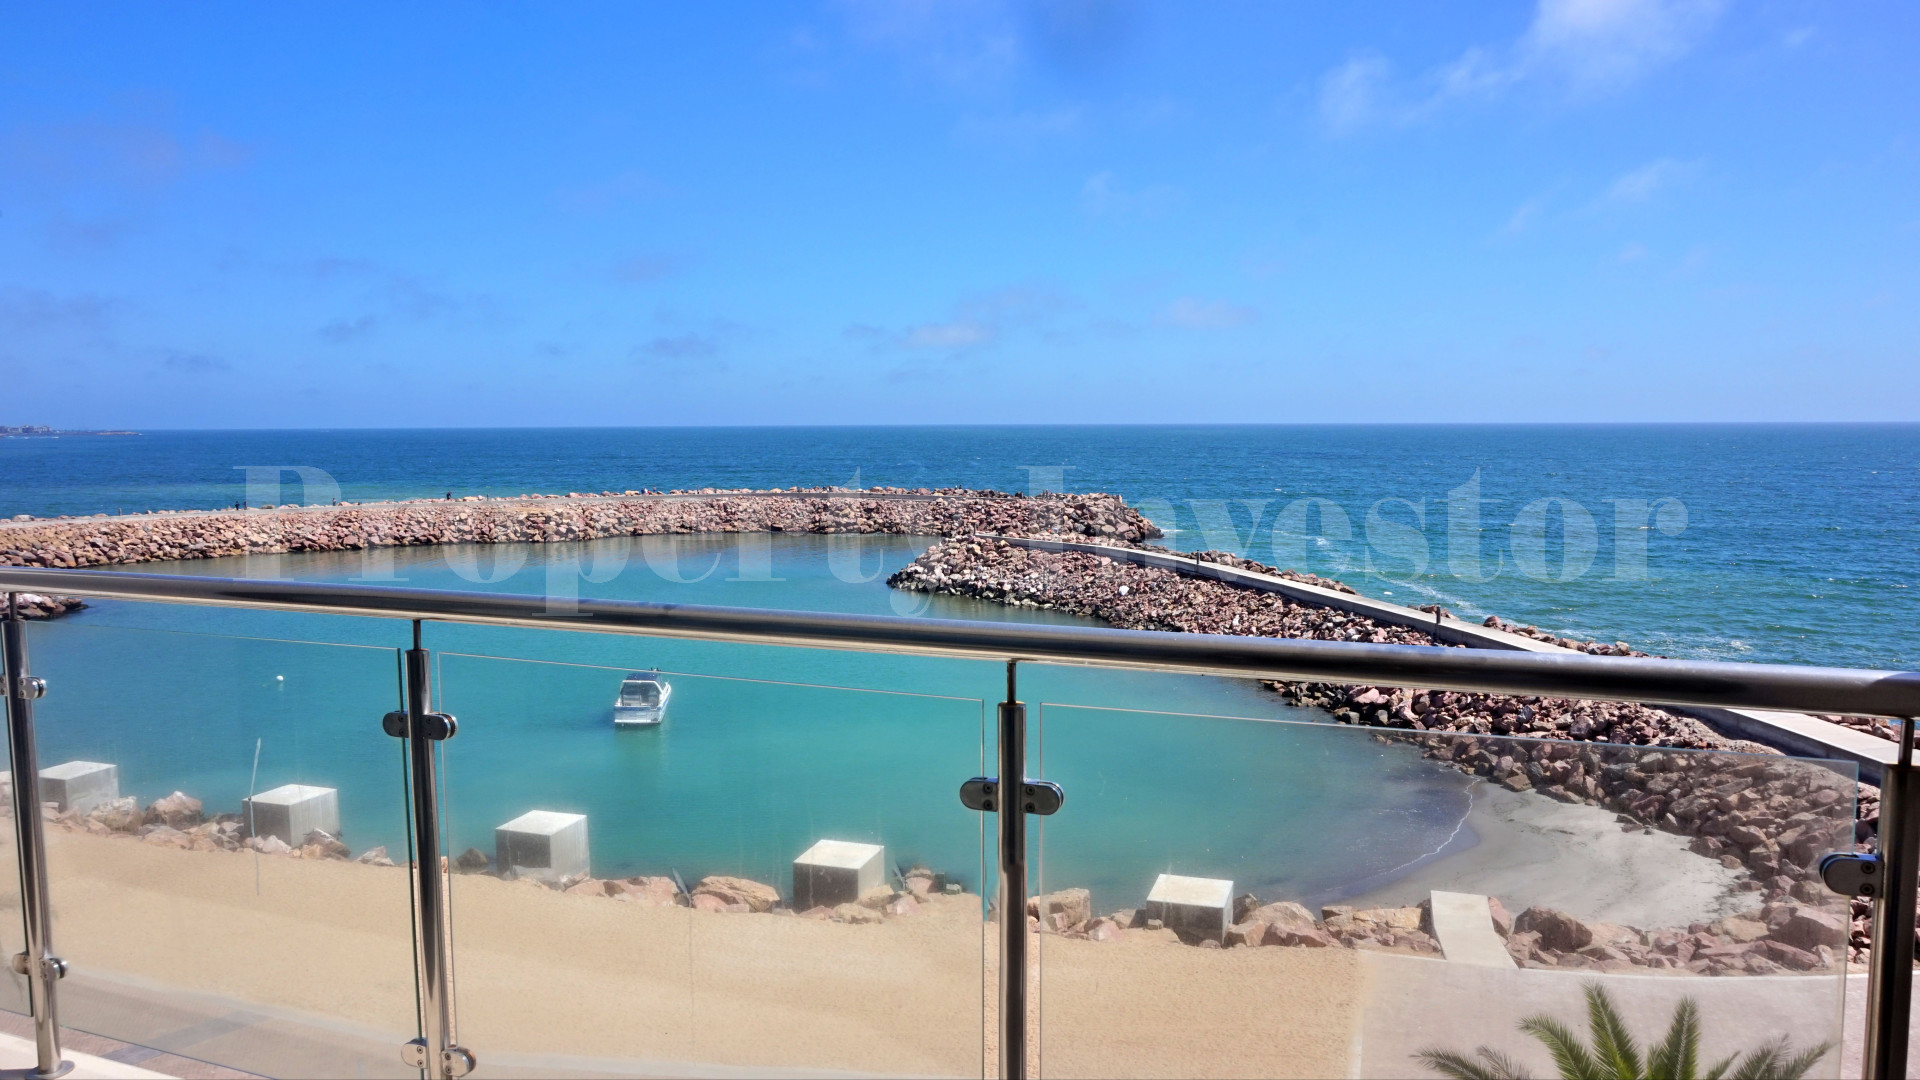 Exclusive 3 Bedroom Luxury Two Floor Waterfront Apartment with Spectacular Ocean Views for Sale in Swakopmund, Namibia